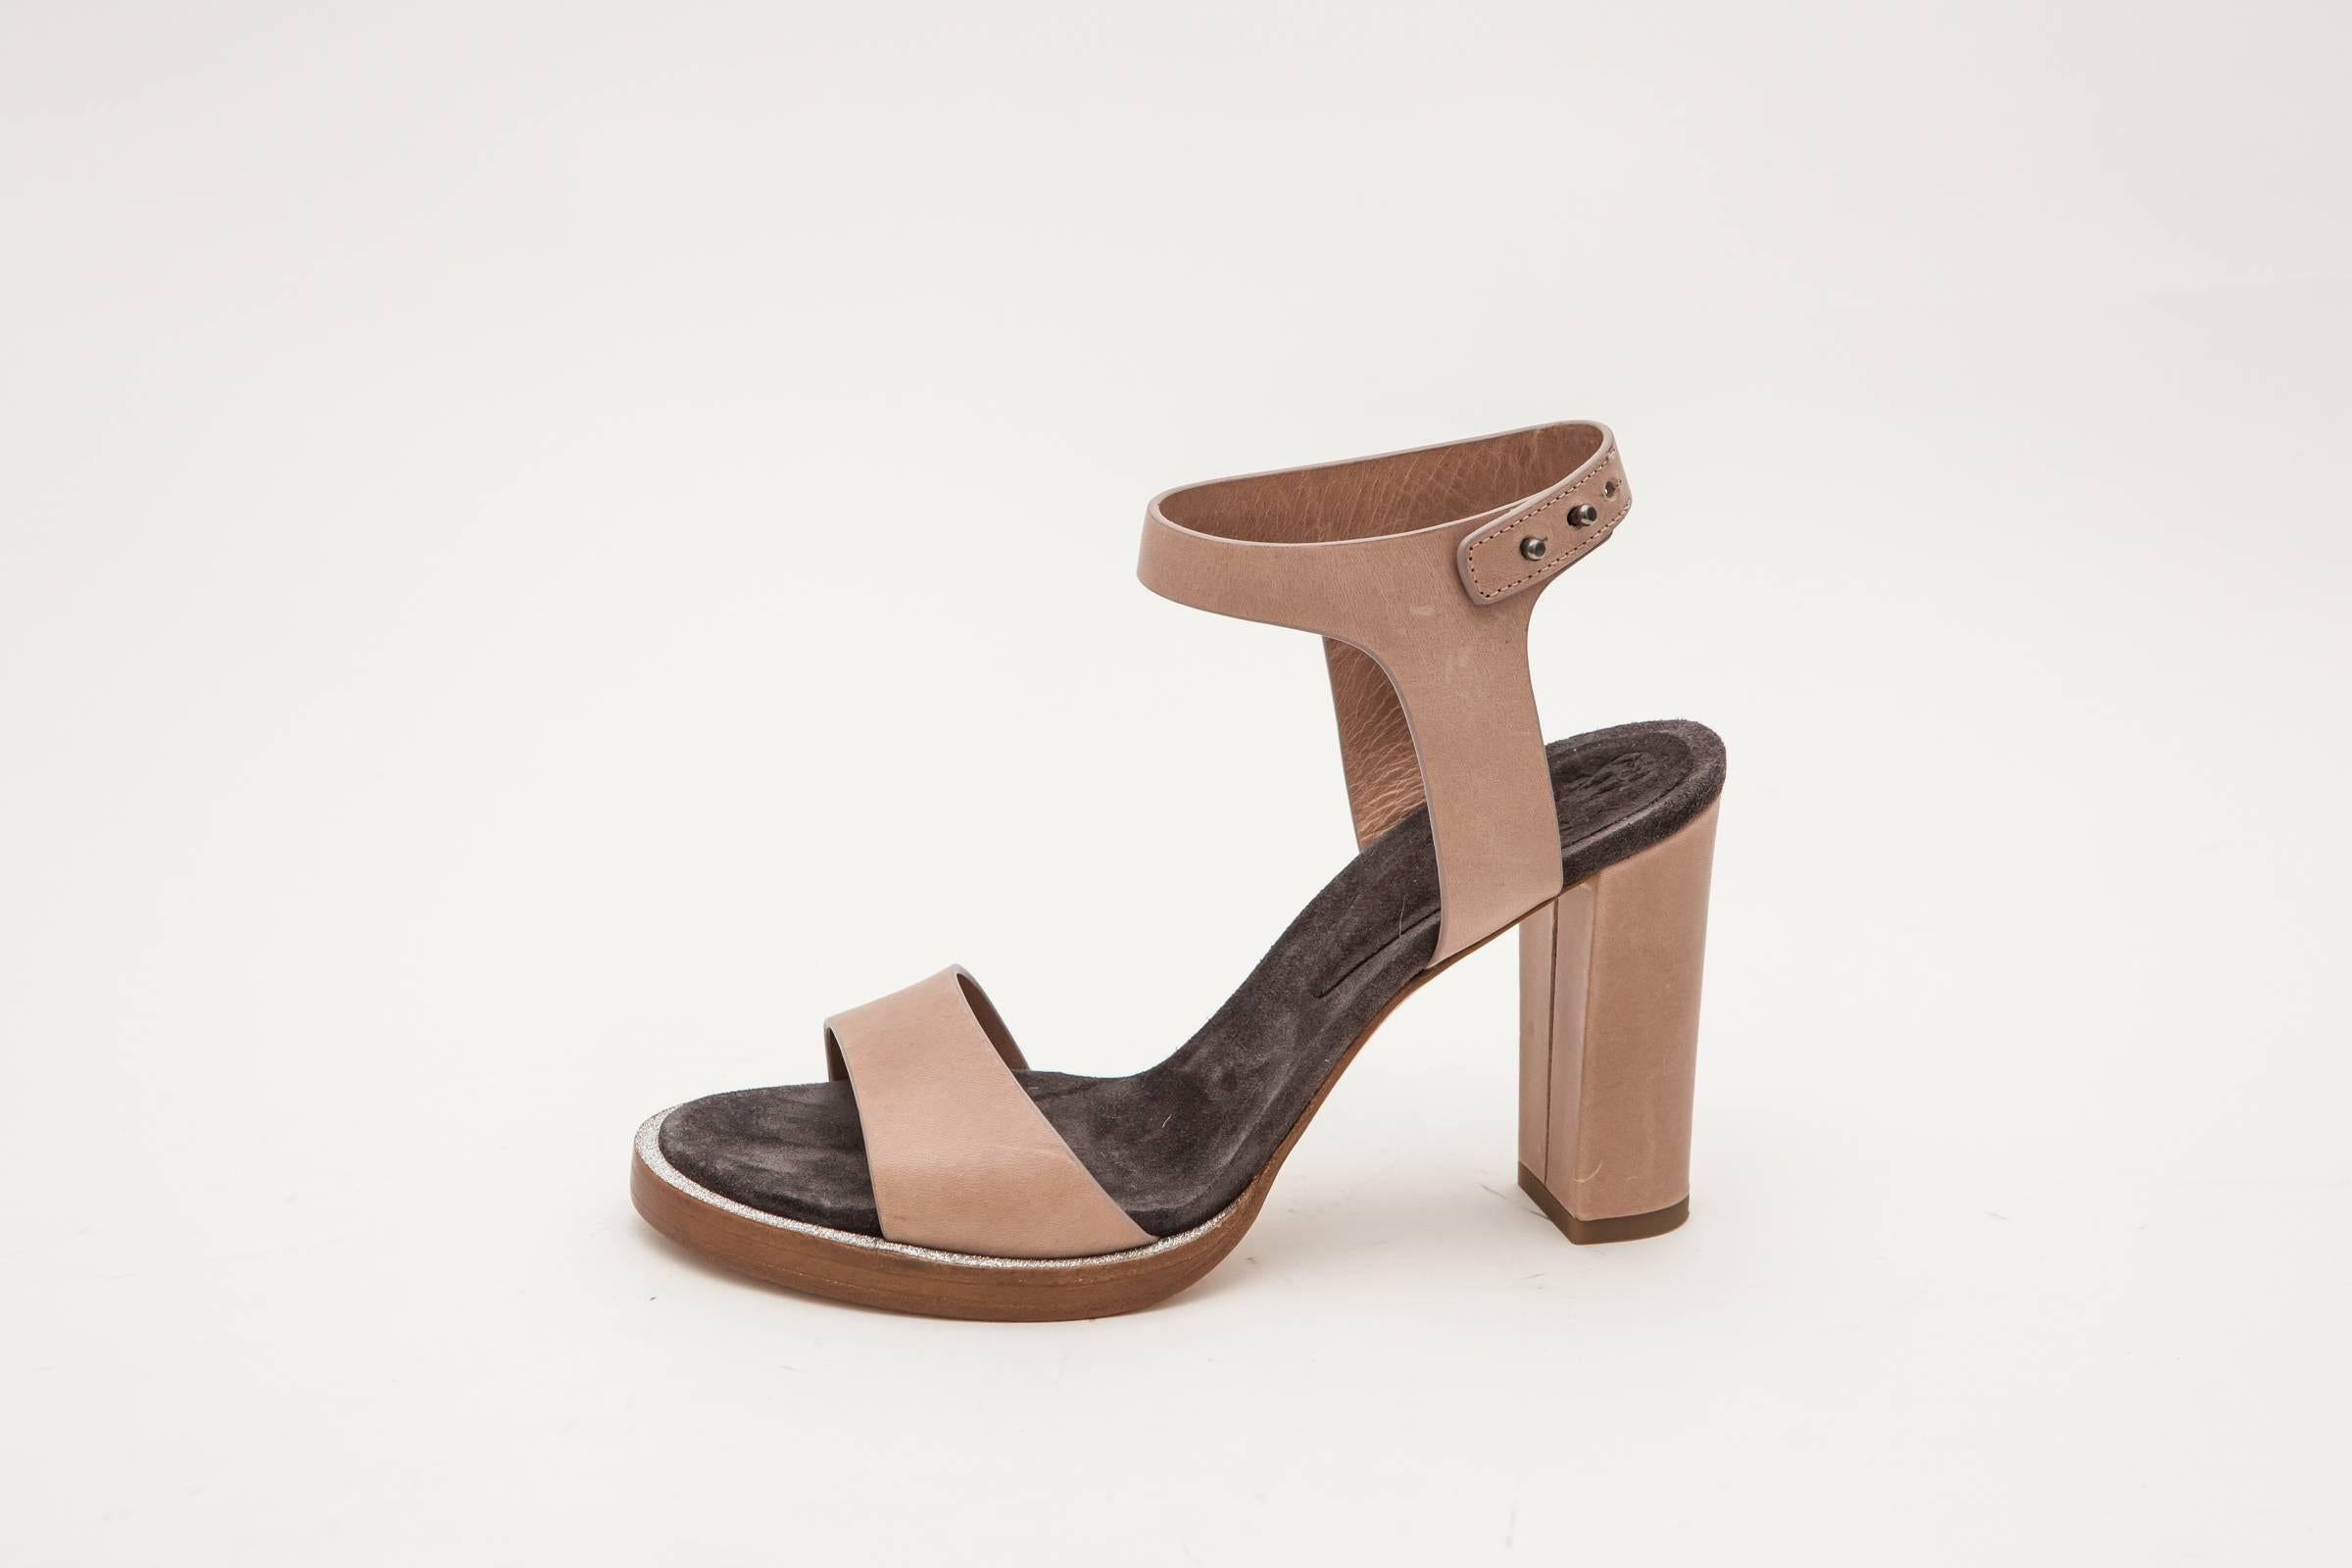 Tan sandals with 3 inch heel, ankle strap and silver rhinestone detail.